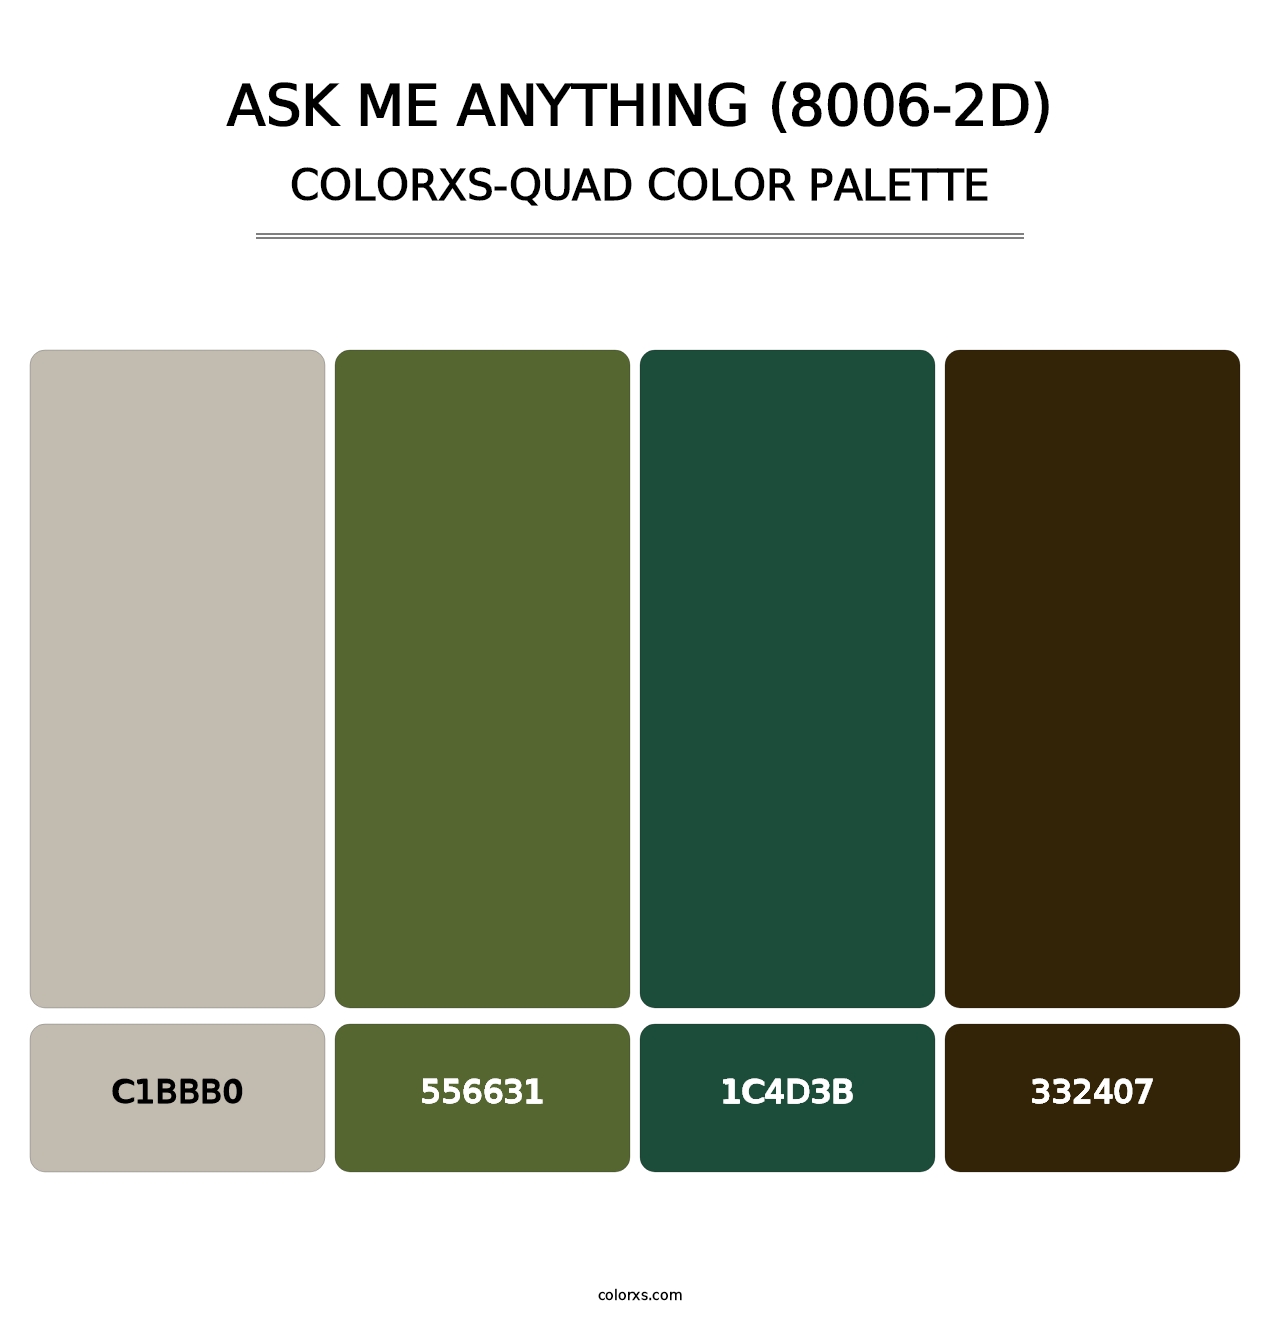 Ask Me Anything (8006-2D) - Colorxs Quad Palette